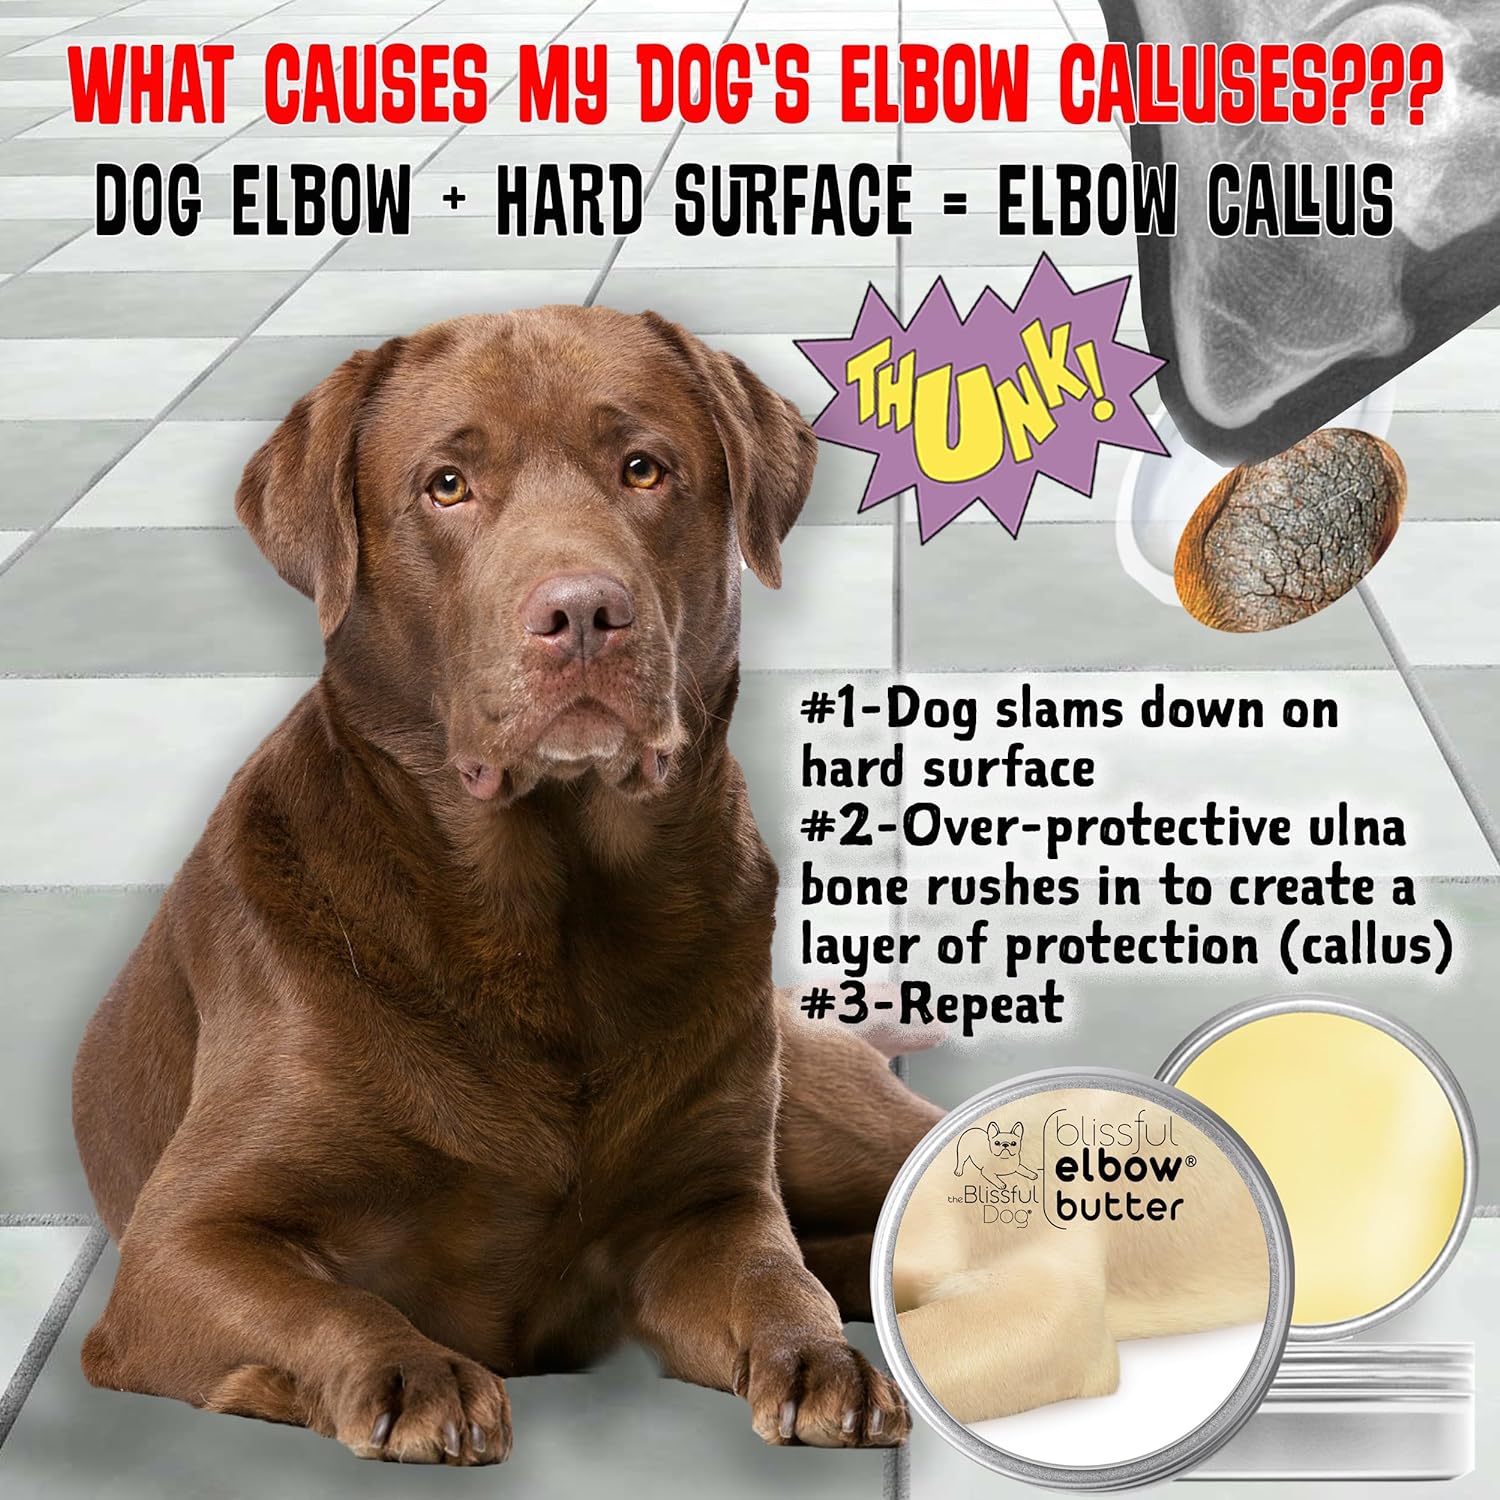 The Blissful Dog Elbow Butter Moisturizes Your Dog's Elbow Calluses - Dog Balm, 1-Ounce : Pet Supplies